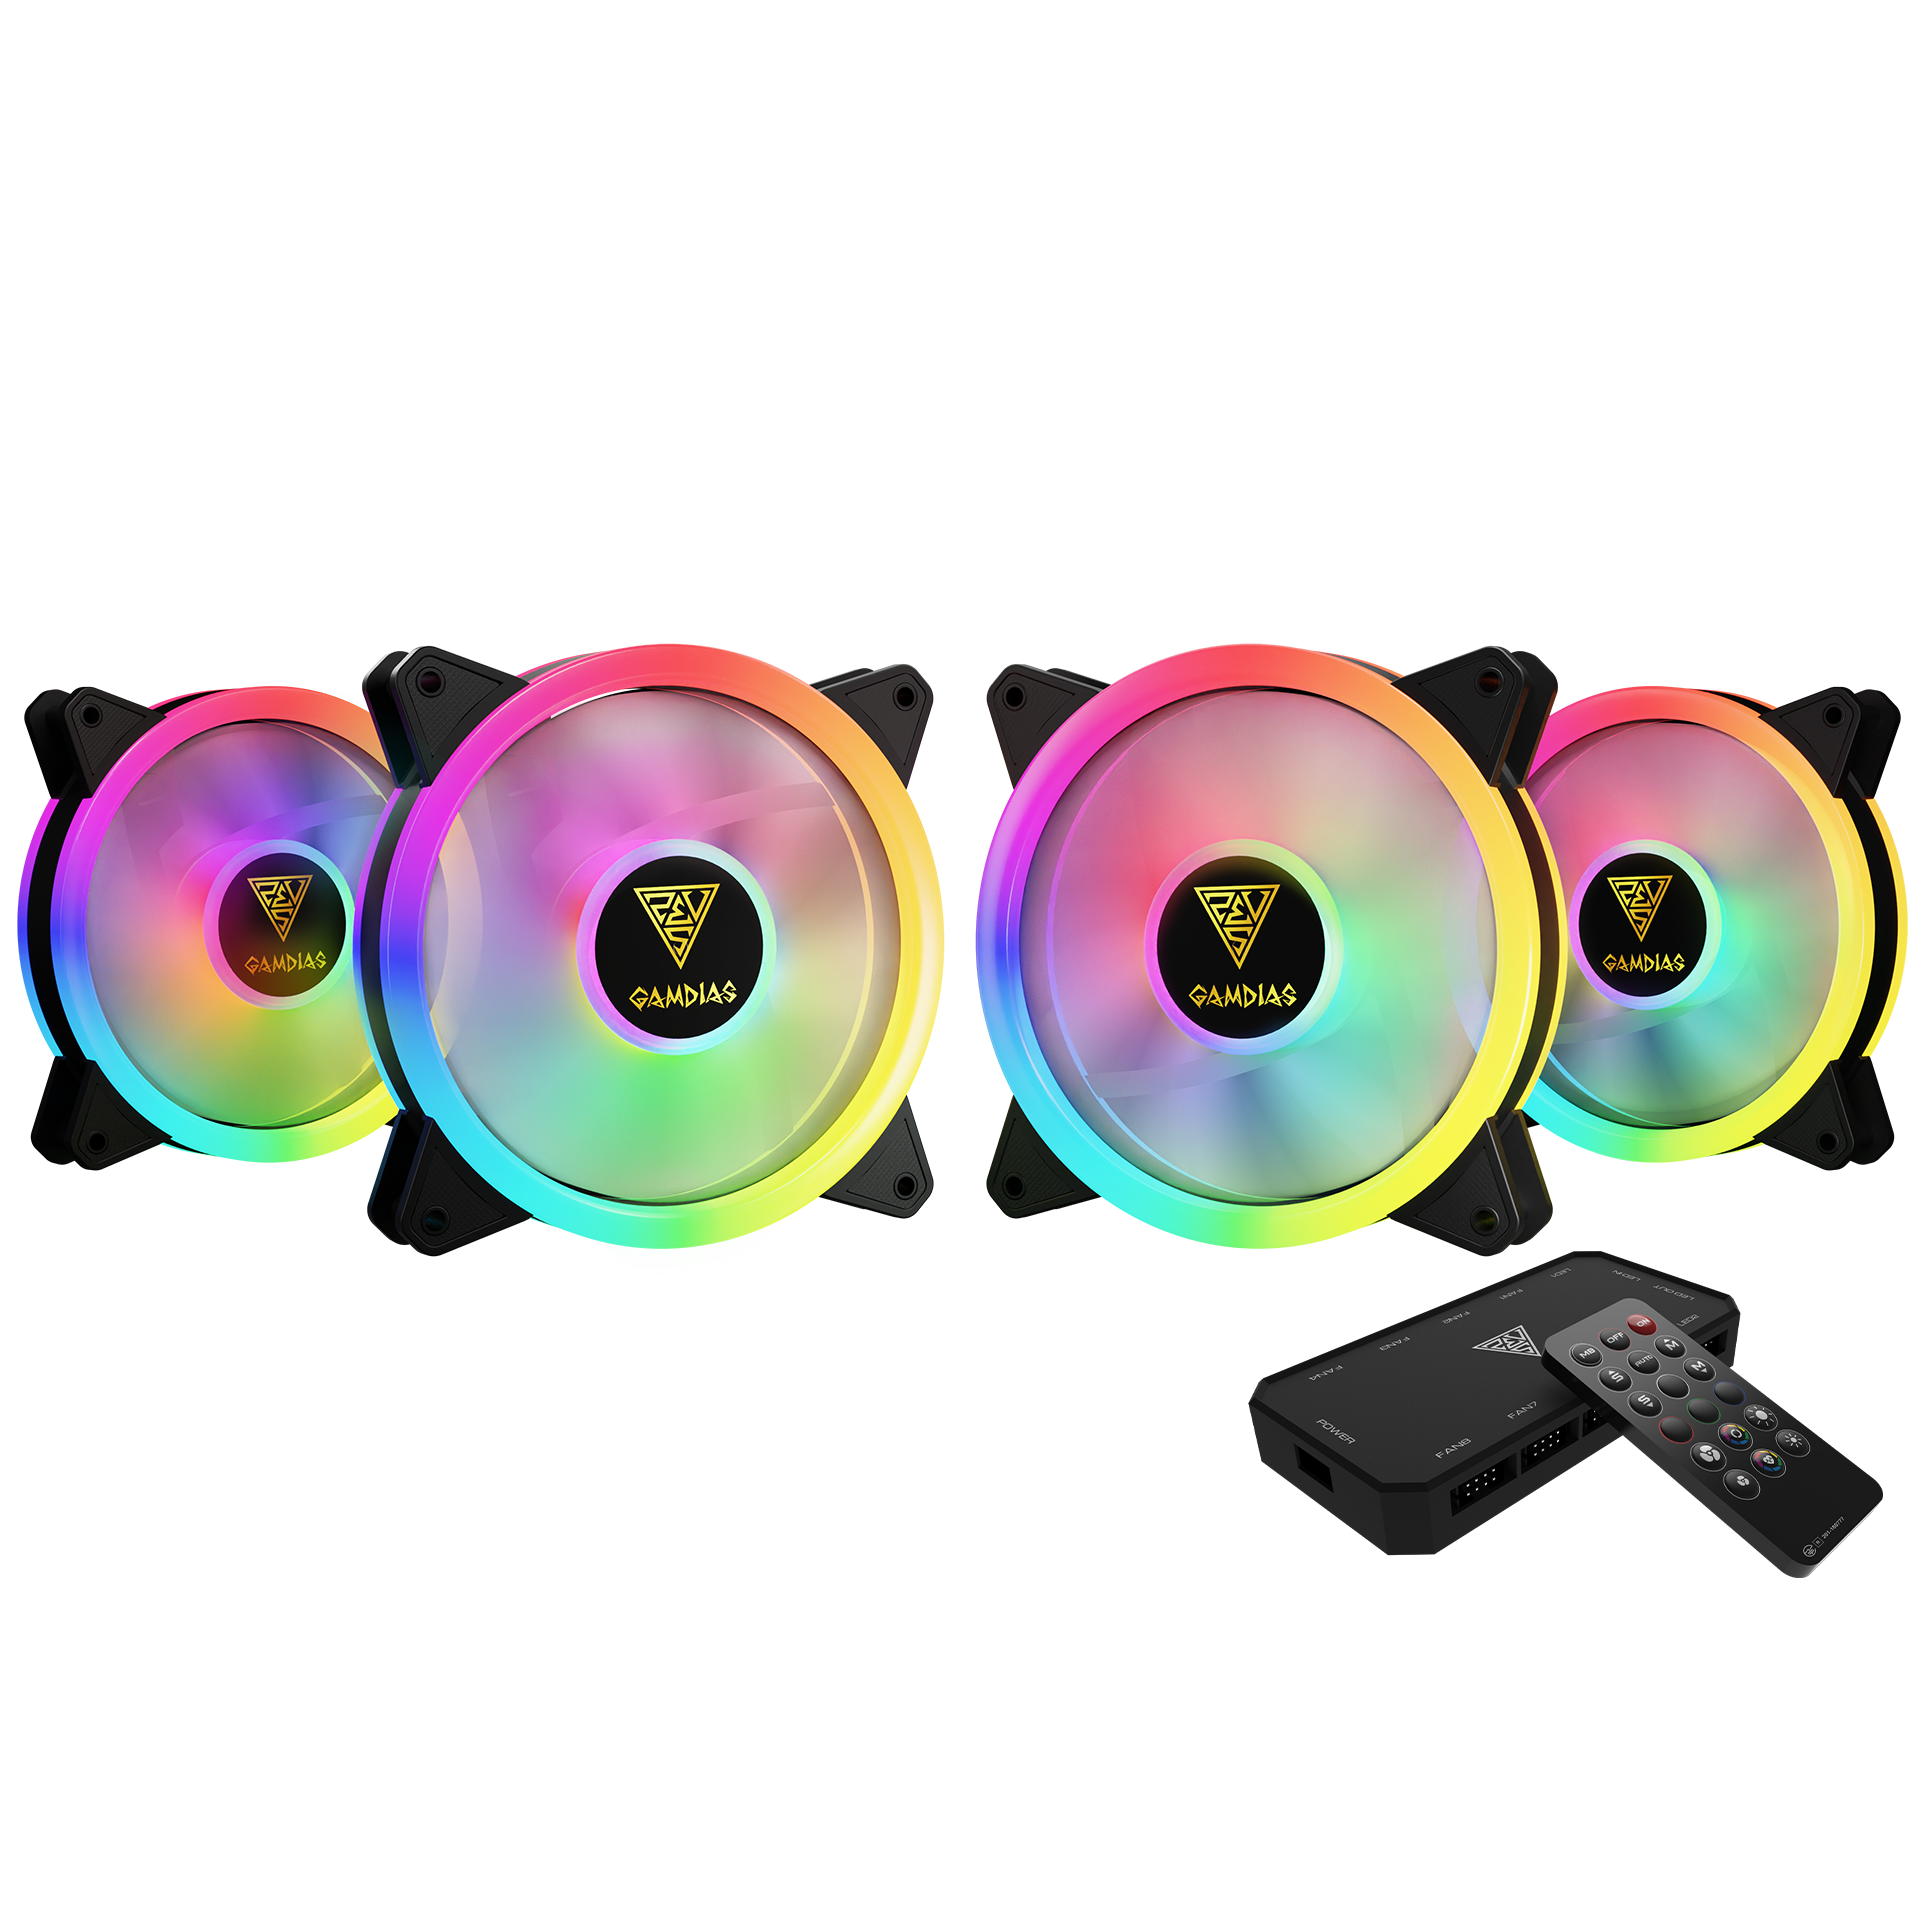 Gamdias 4-Pack ARGB Computer Case Fans Trio-Ring PC 120mm Cooling Fans with Controller (AEOLUS M2-1204R)